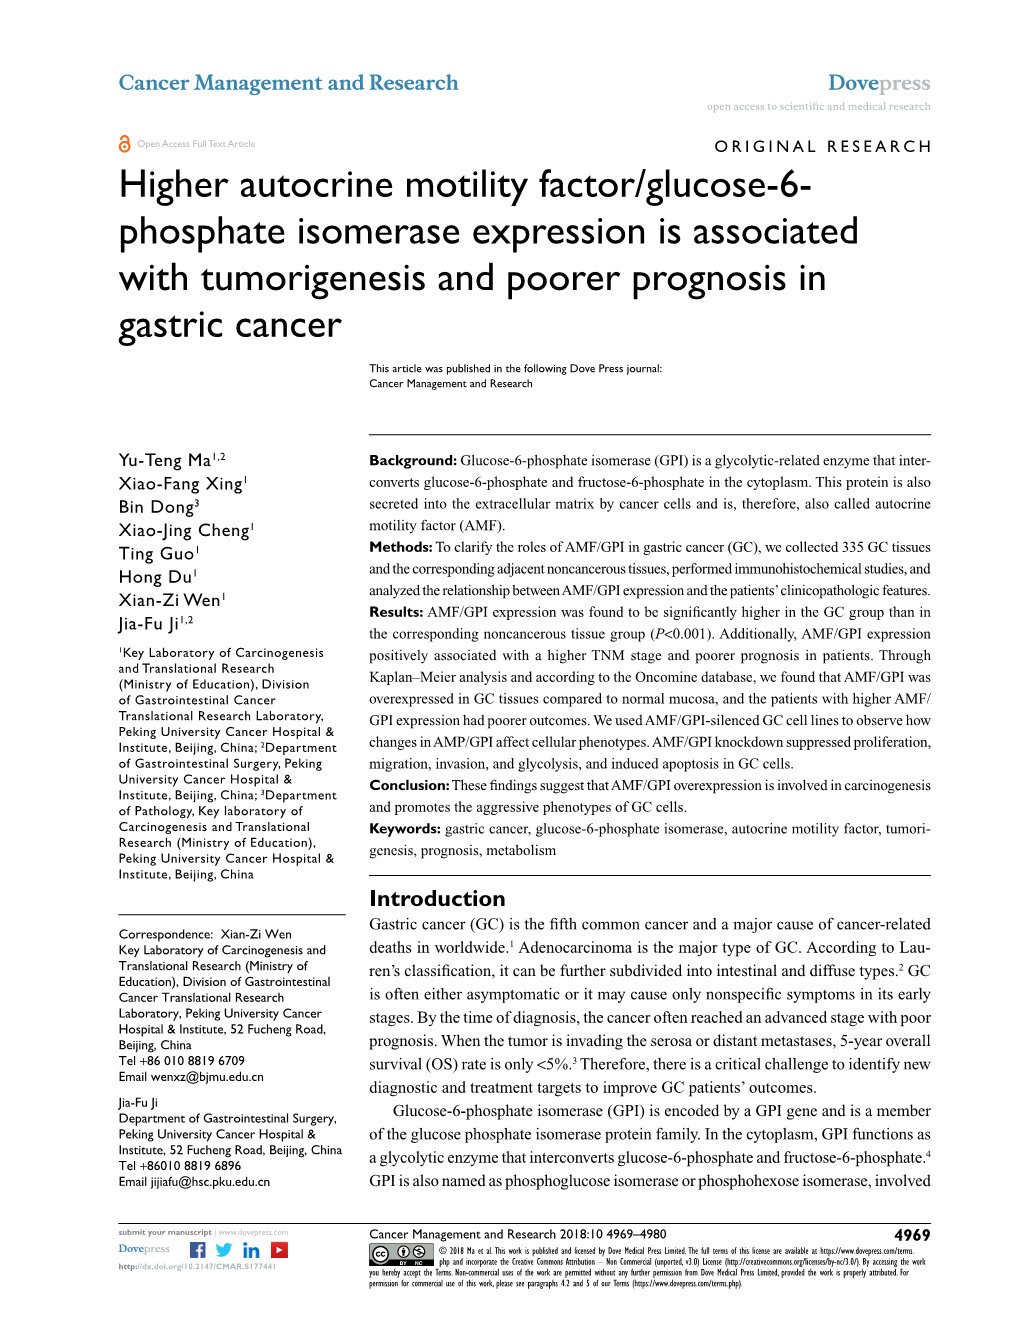 Higher Autocrine Motility Factor/Glucose-6- Phosphate Isomerase Expression Is Associated with Tumorigenesis and Poorer Prognosis in Gastric Cancer